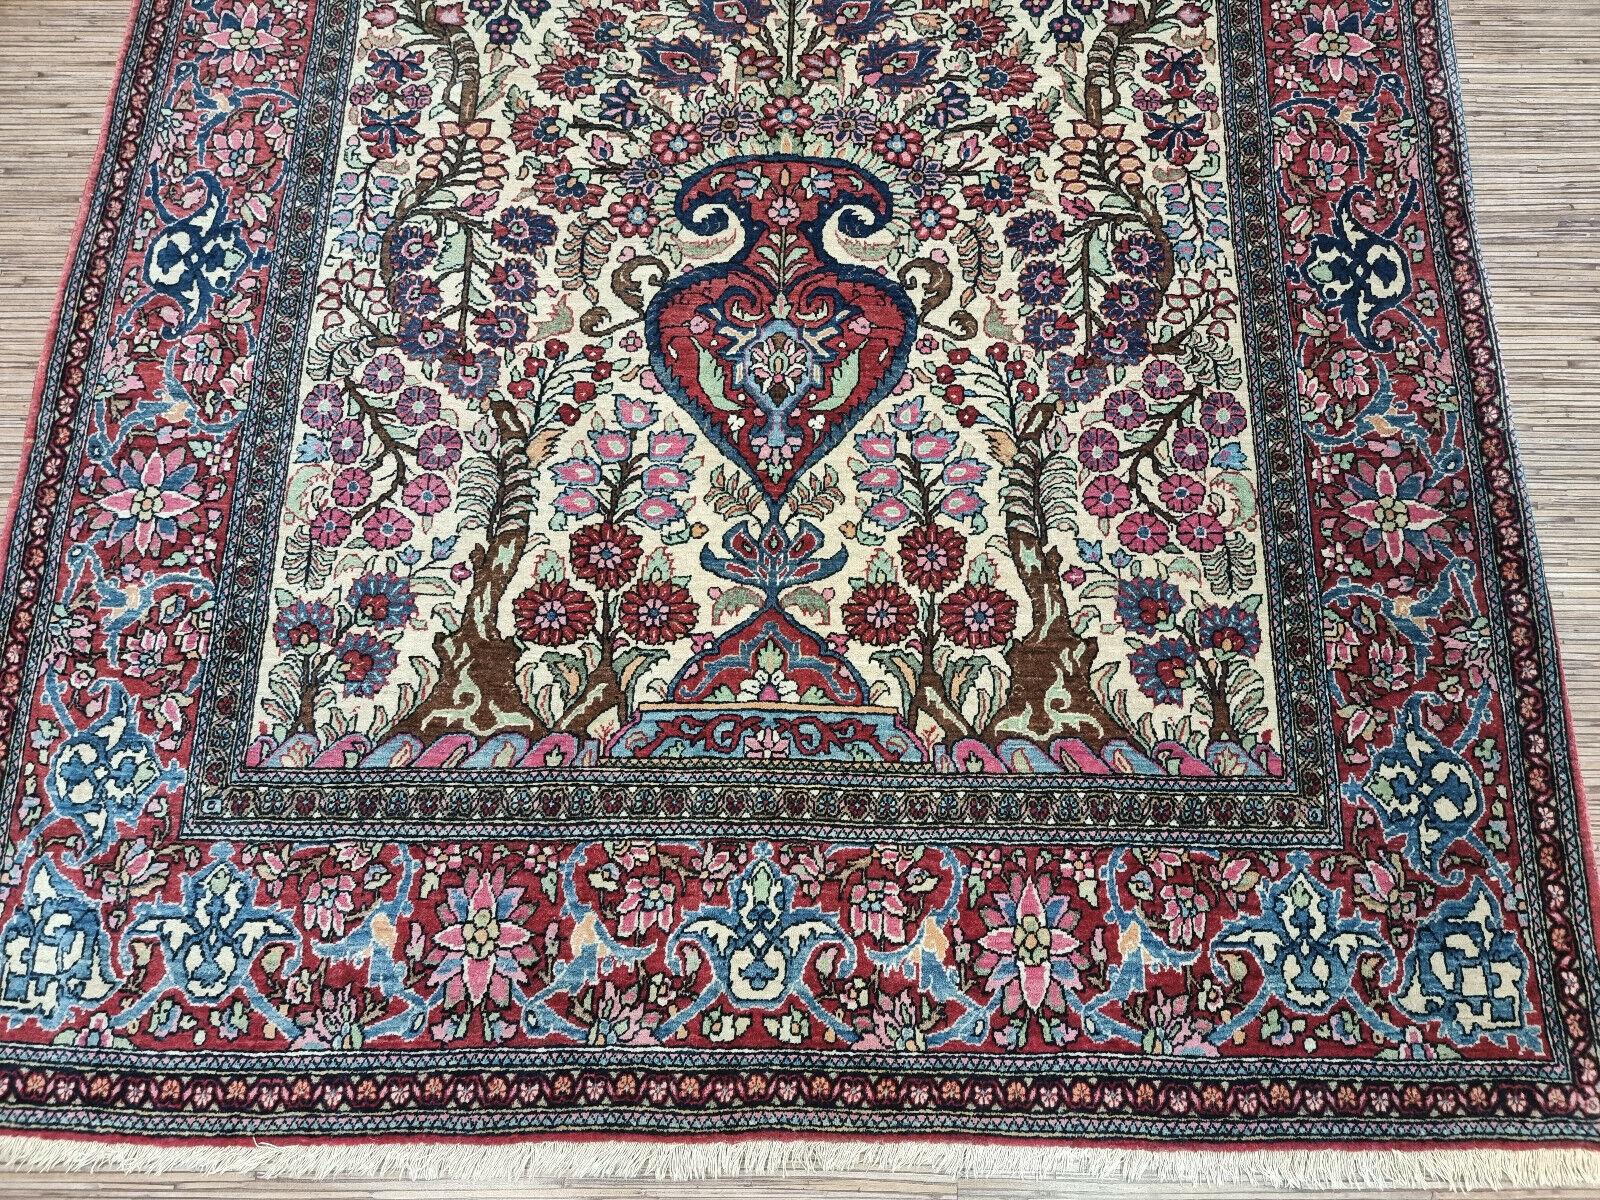 Handmade Antique Persian Style Isfahan Prayer Rug 4.6' x 6.8', 1900s - 1D85 For Sale 1